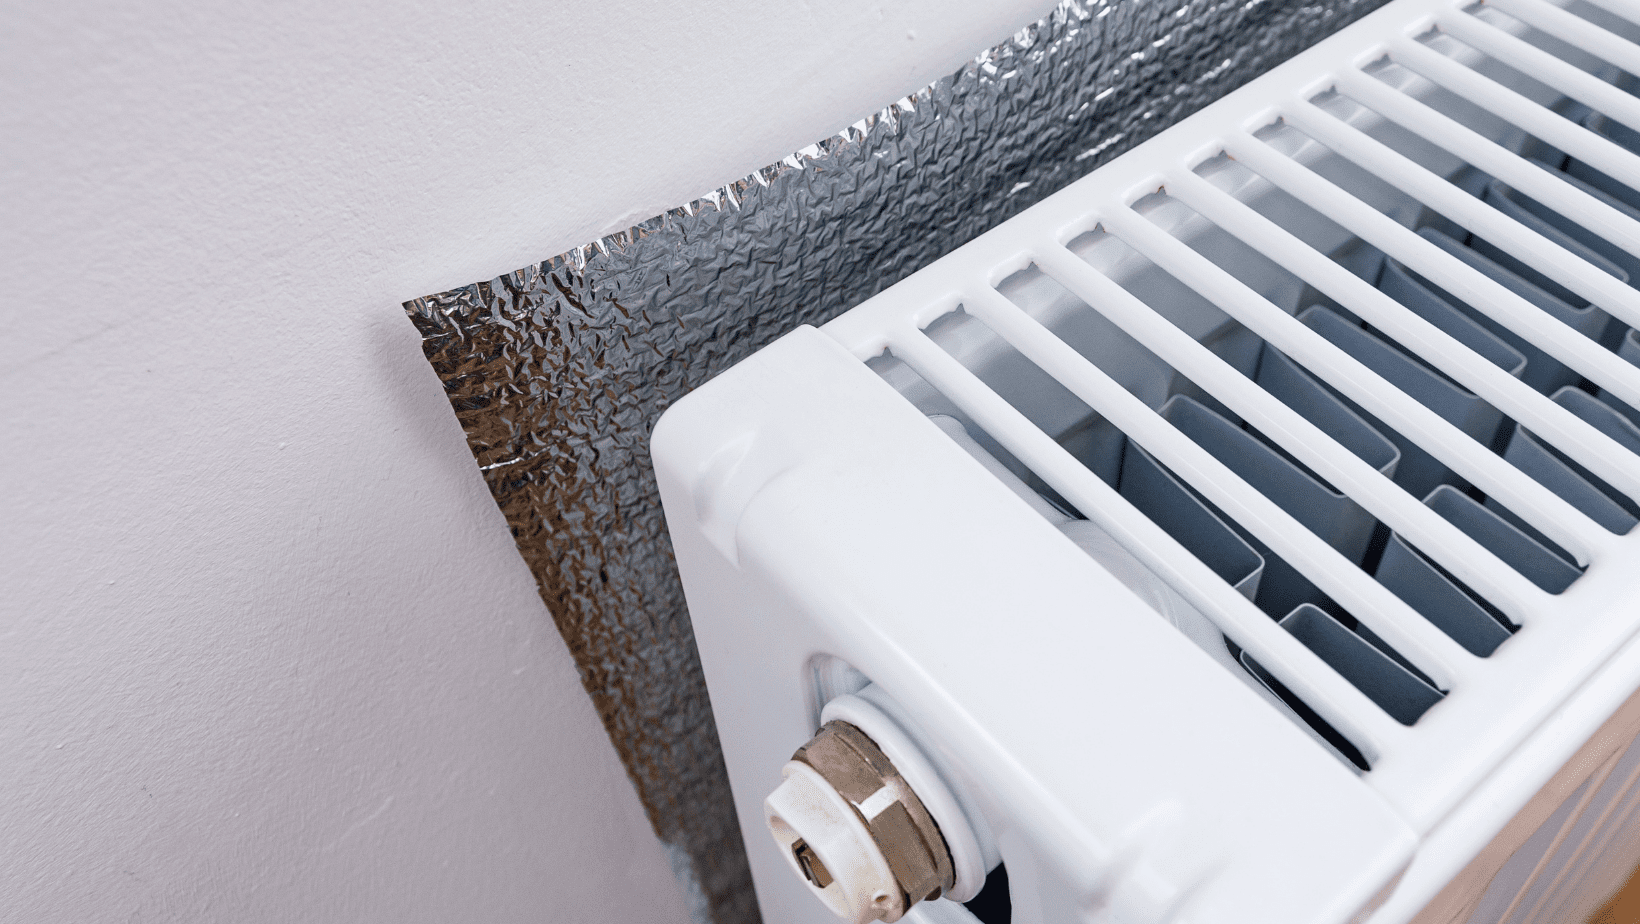 tin foil behind radiators to save money on heating